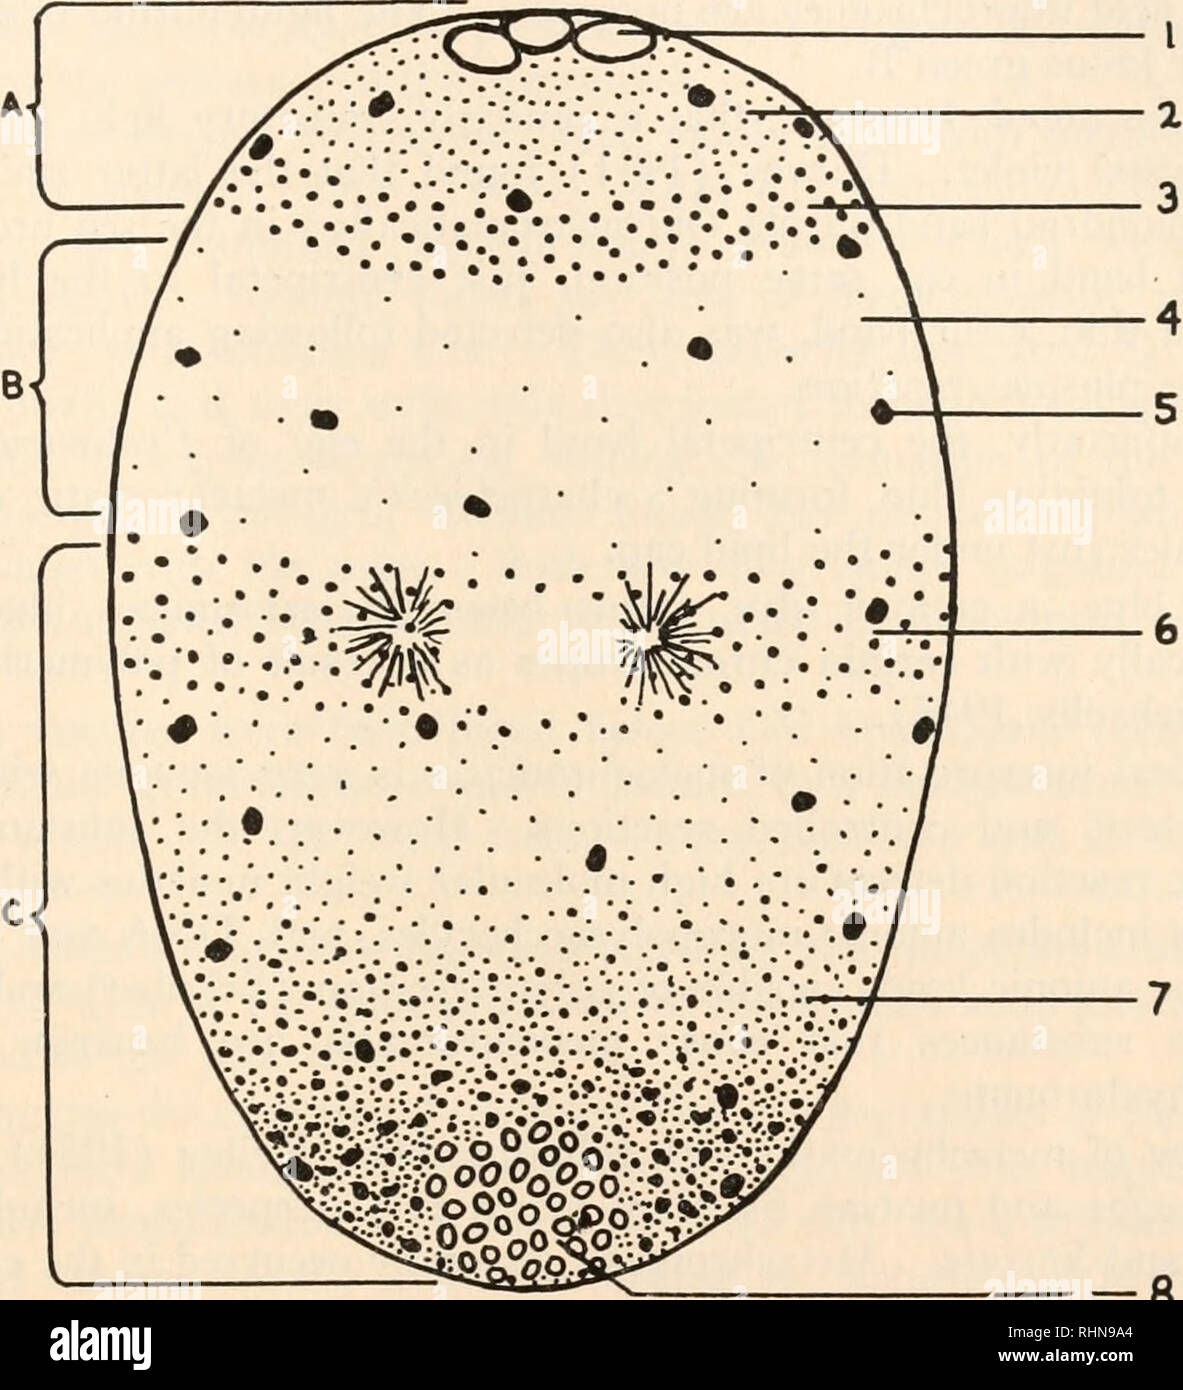 . The Biological bulletin. Biology; Zoology; Biology; Marine Biology. VITAL STAINING OF PECTINARIA 441 after staining with gentian violet or methylene blue resulted in the mitochondria concentrating at the extreme centrifugal end of the egg. However, electron microscope studies of stratified sea urchin eggs by Lansing, Hillier and Rosenthal (1952) indicated that two layers of mitochondria stratified, one of high density just above the yolk granule layer and one of low density in the centripetal lipid layer. In similar studies, Gross, Philpott and Nass (1956) reported that the mito- chondria we Stock Photo